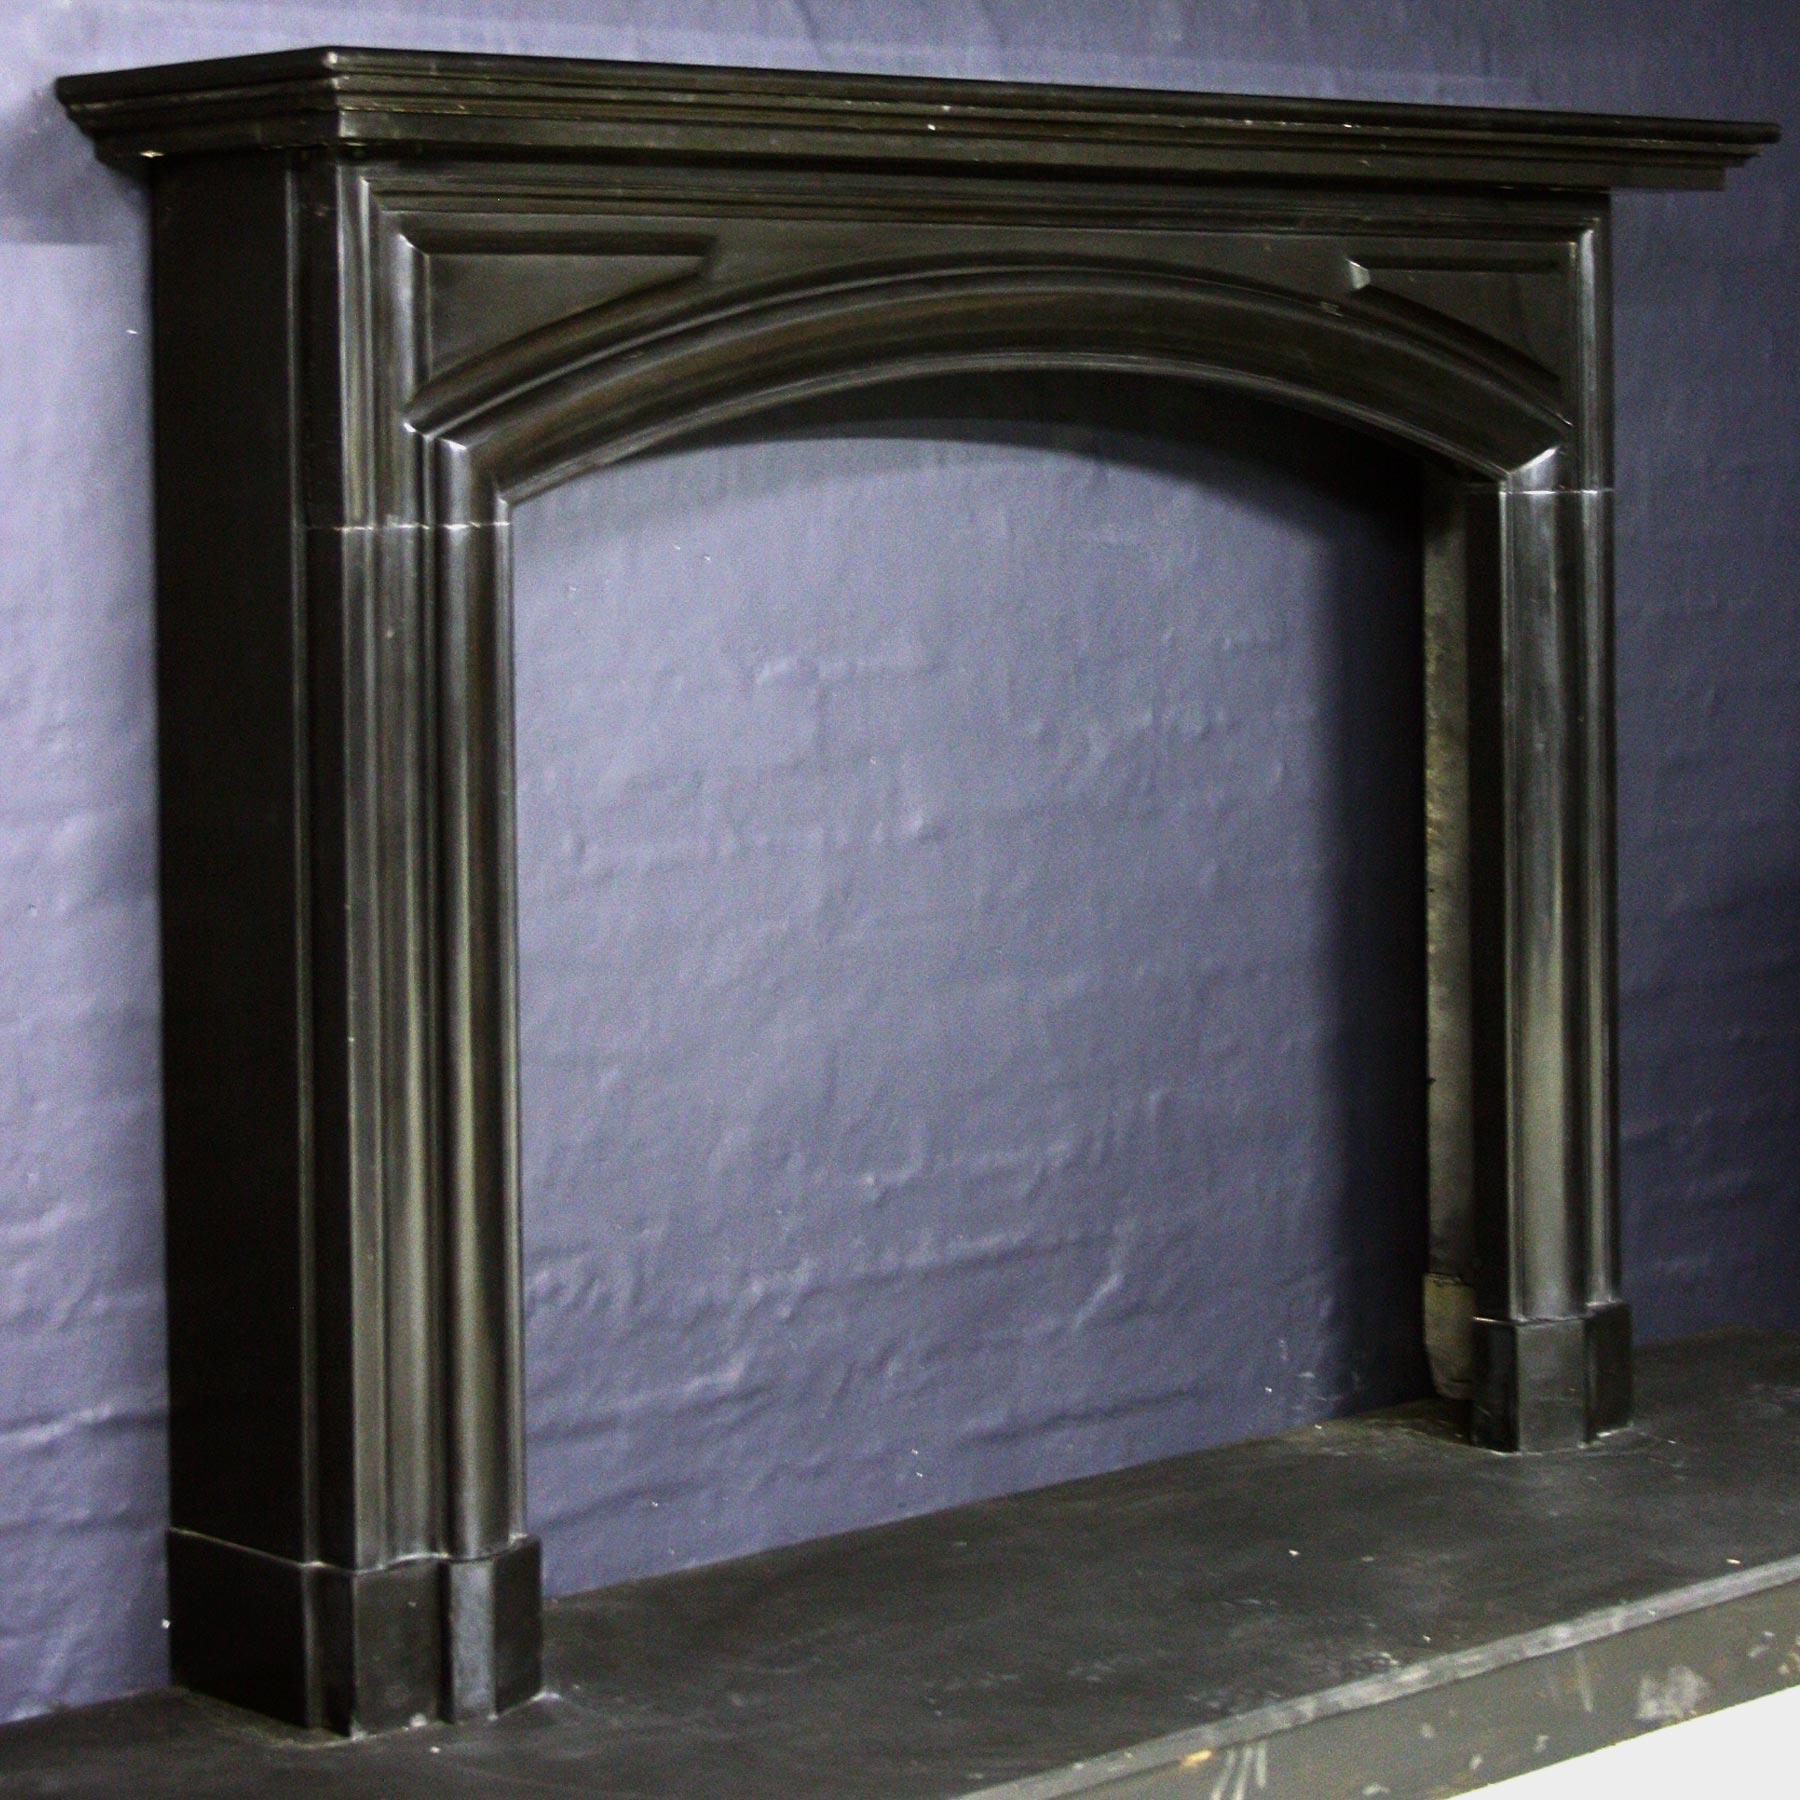 A 19th century Belgian black chimneypiece, with a moulded architectural shelf, arched frieze with raised and fielded panels, and a bold Bolection moulding continuing down the jambs - framing the aperture - all on block feet.